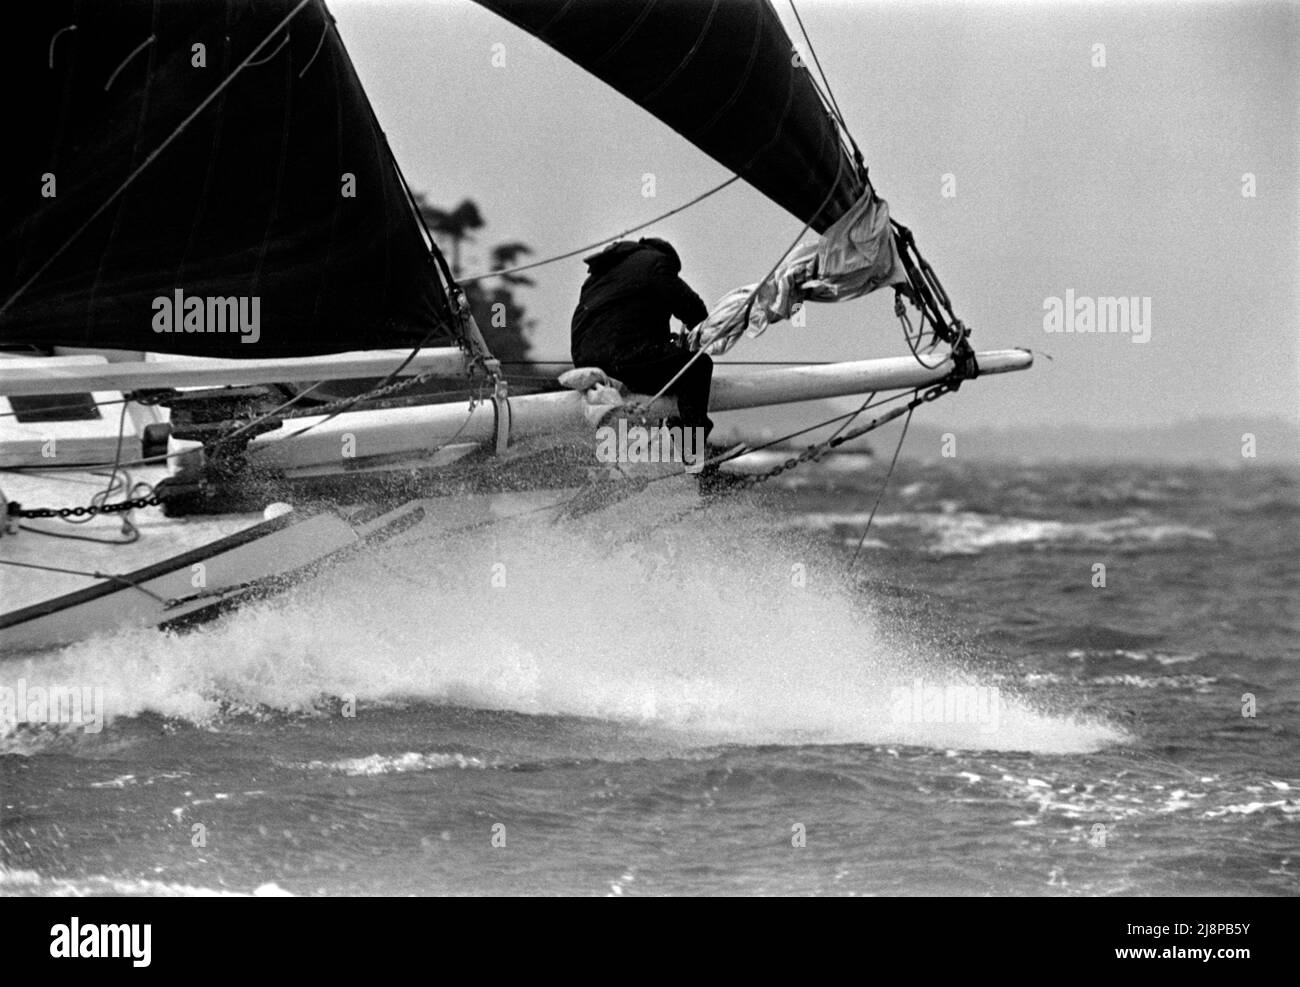 AJAXNETPHOTO. 16TH SEPTEMBER, 1977. SOLENT, ENGLAND. - OLD GAFFERS RACE - SKIPPER OF THE YACHT VENUS, PAUL ERLING JOHNSON, ON THE BOWSPRIT OF HIS YACHT STOWING SAIL IN HEAVY WEATHER. YACHT WAS LATER LOST OFF NORTH COAST OF AUSTRALIA.PHOTO:JONATHAN EASTLAND/AJAX REF:771609 1 Stock Photo